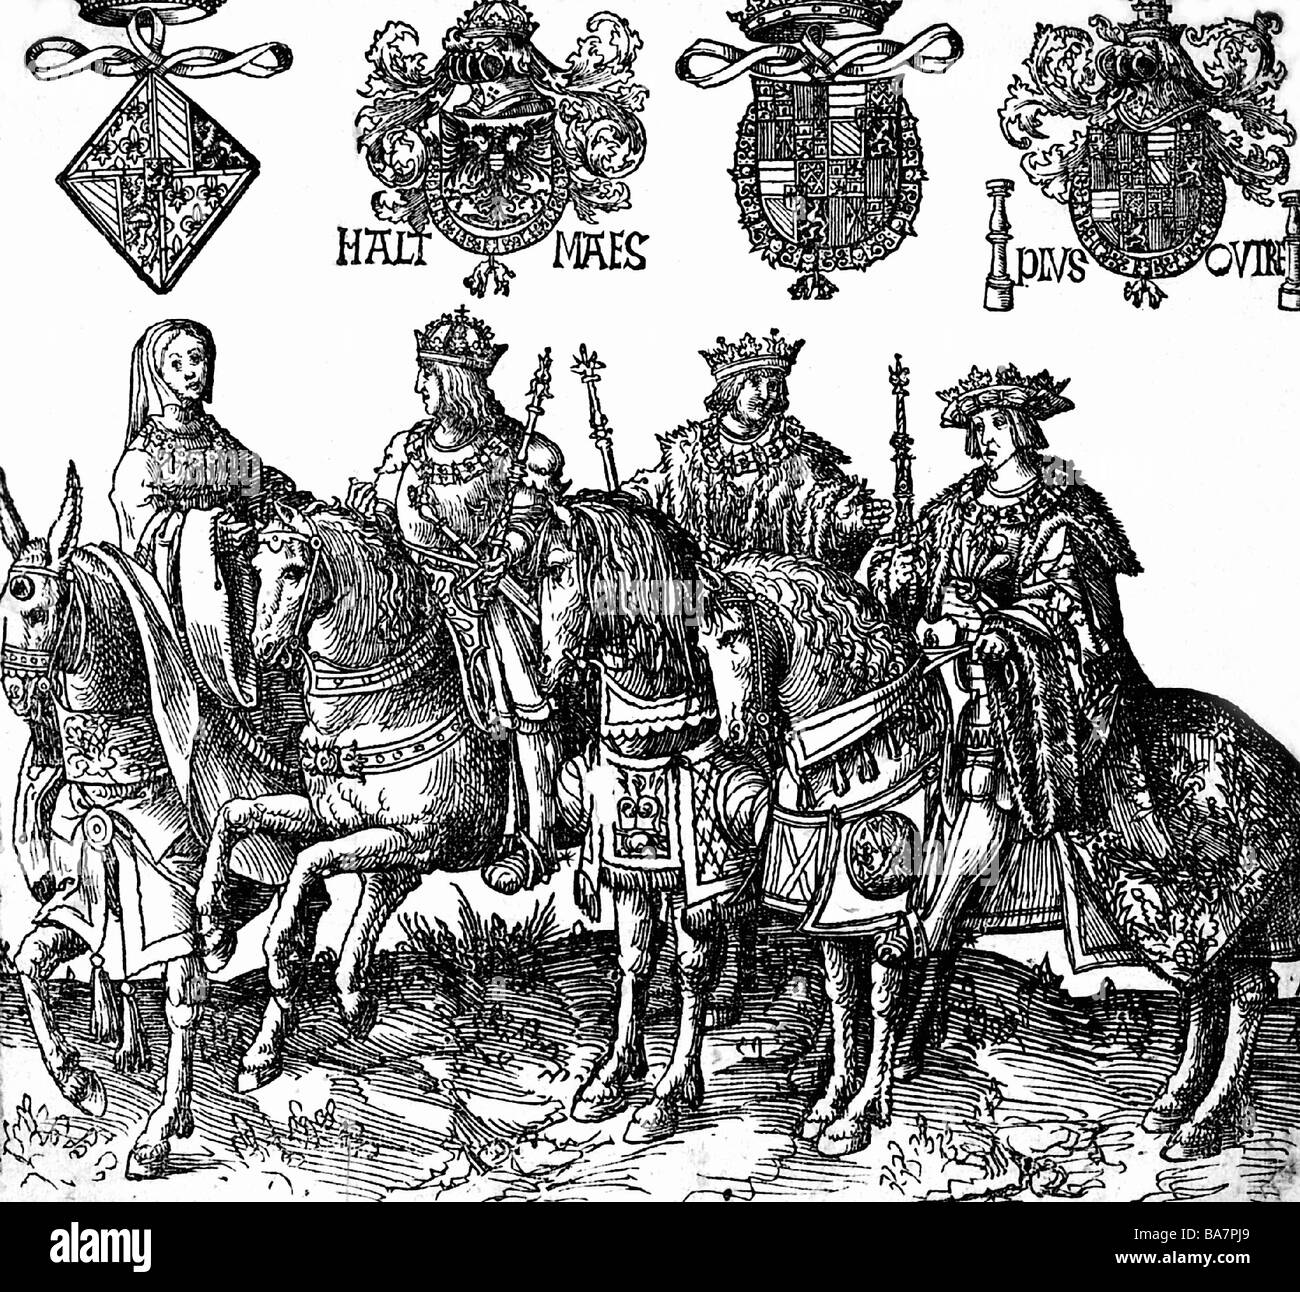 Maximilian I, 22.3.1459 - 12.1.1519, Holy Roman Emperor 4.2.1508 - 12.1.1519, with wife Mary of Burgundy, son Philipp 'the Handsome' and grandson Charles V, woodcut by Jacob Cornelisz van Oostsanen, 'Counts and Countesses of Holland', circa 1520, , Stock Photo